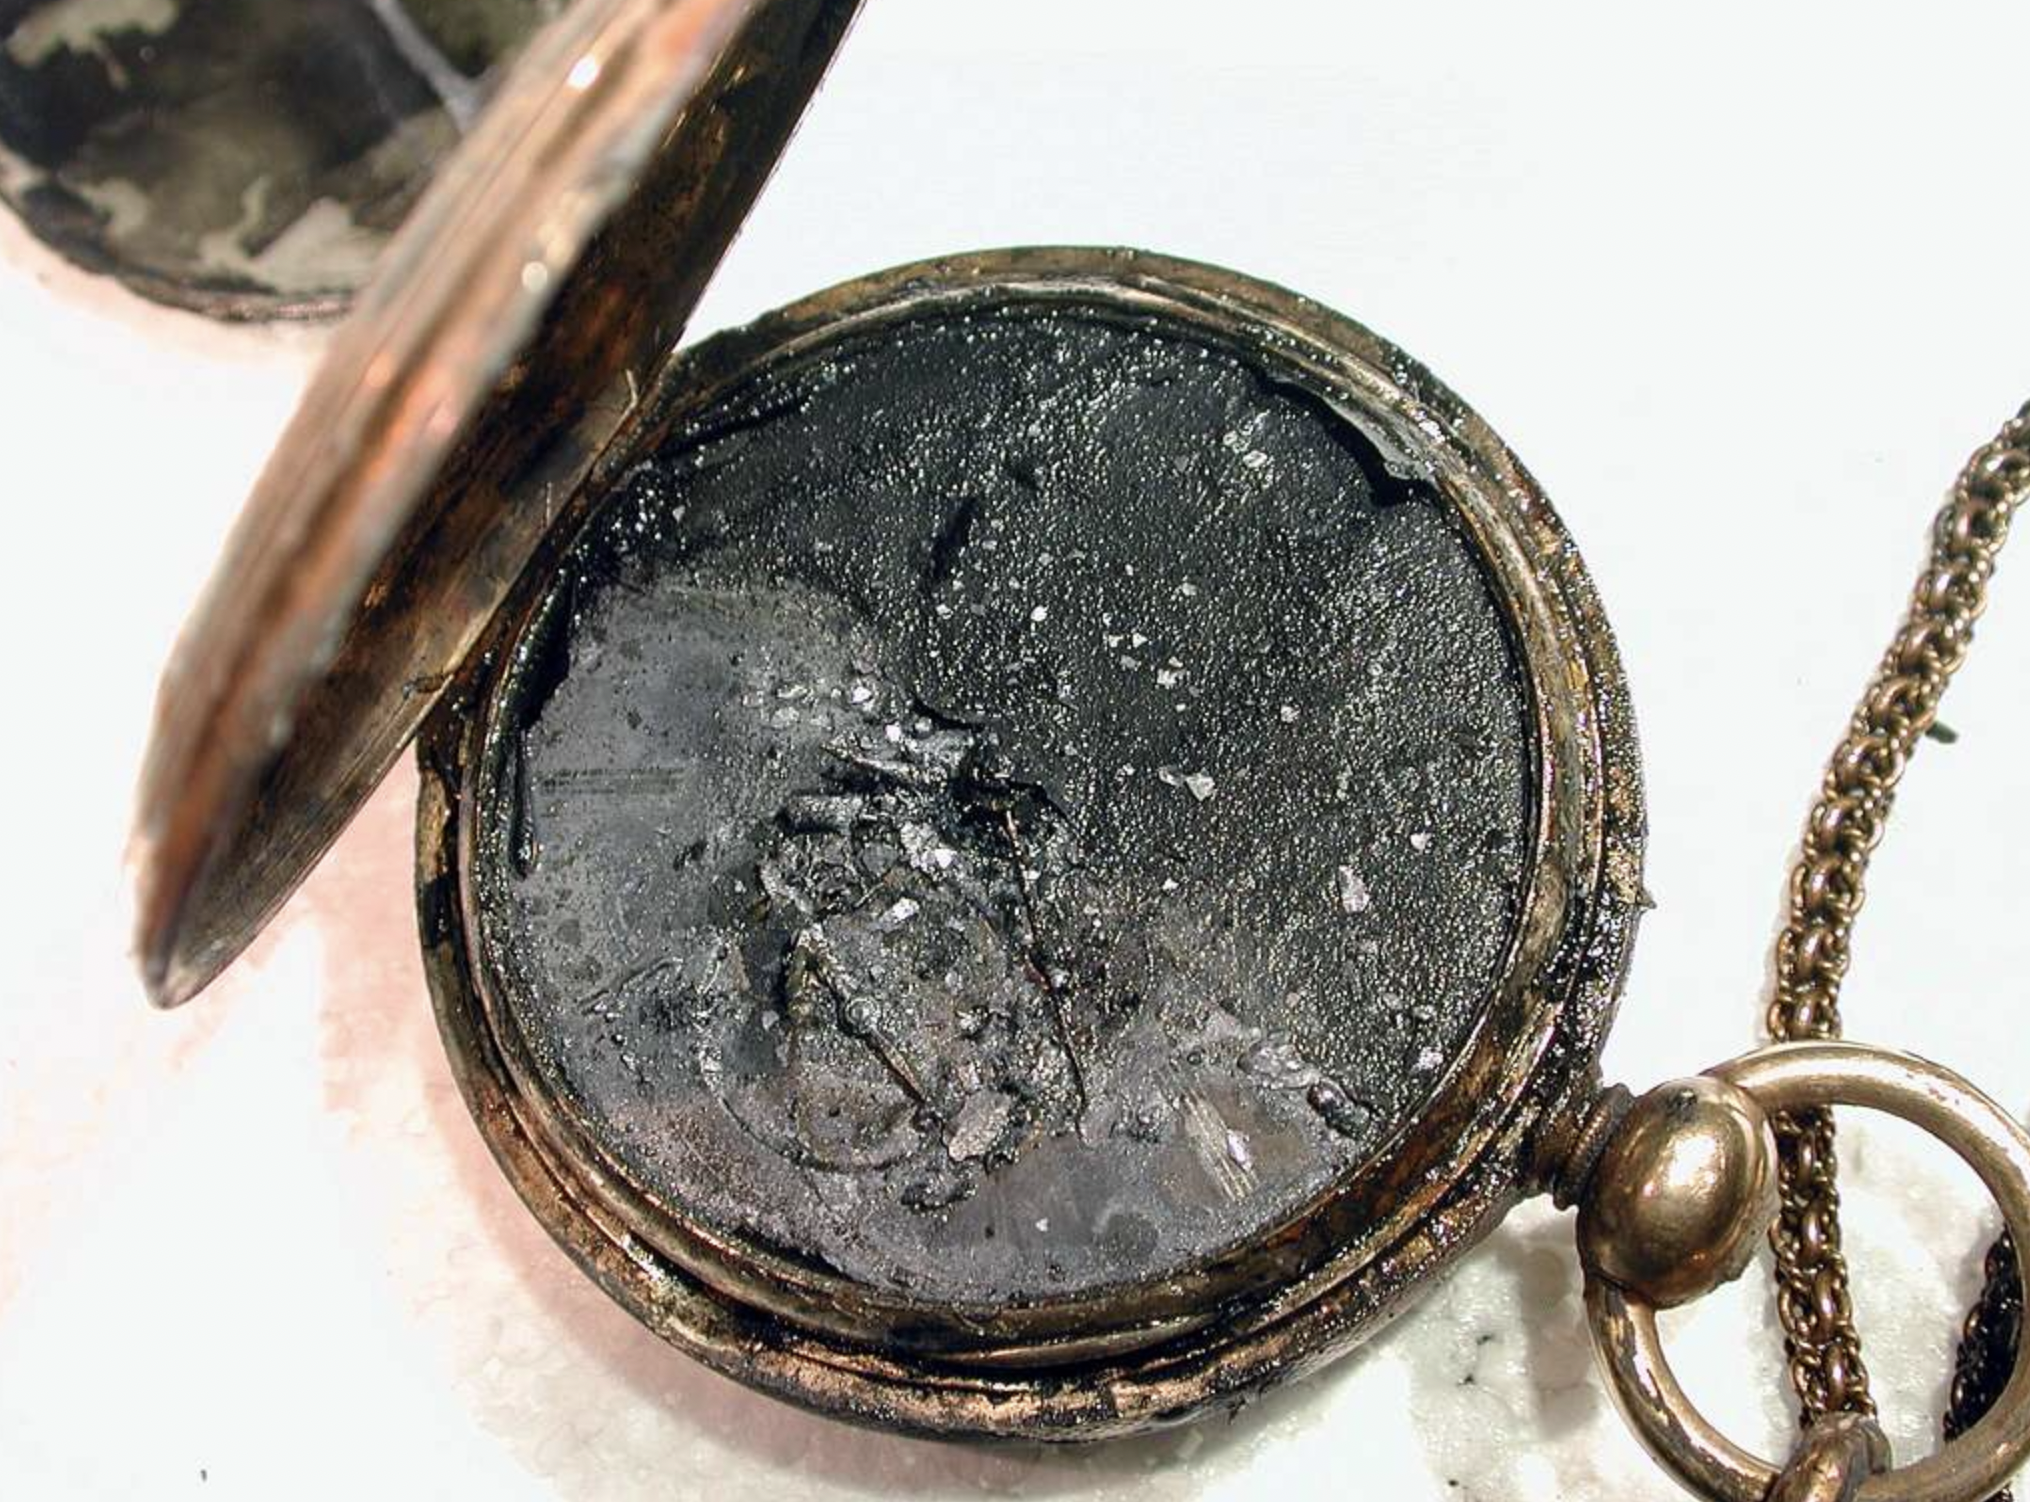 Up Close Detail of Lt. George Dixon's Pocketwatch